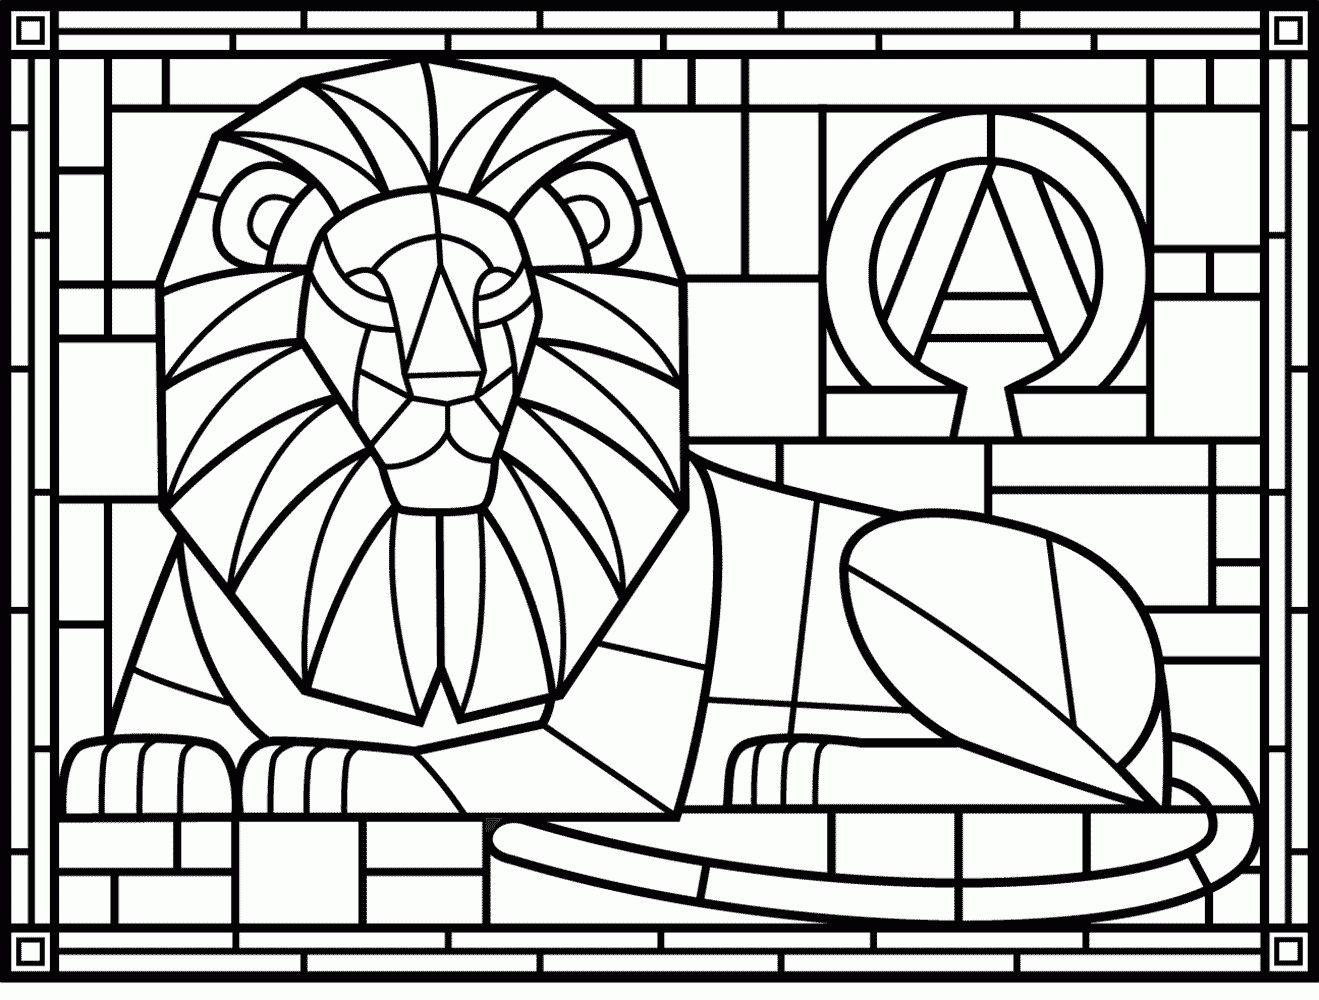 Stained Glass Coloring Sheet - Coloring Pages for Kids and for Adults